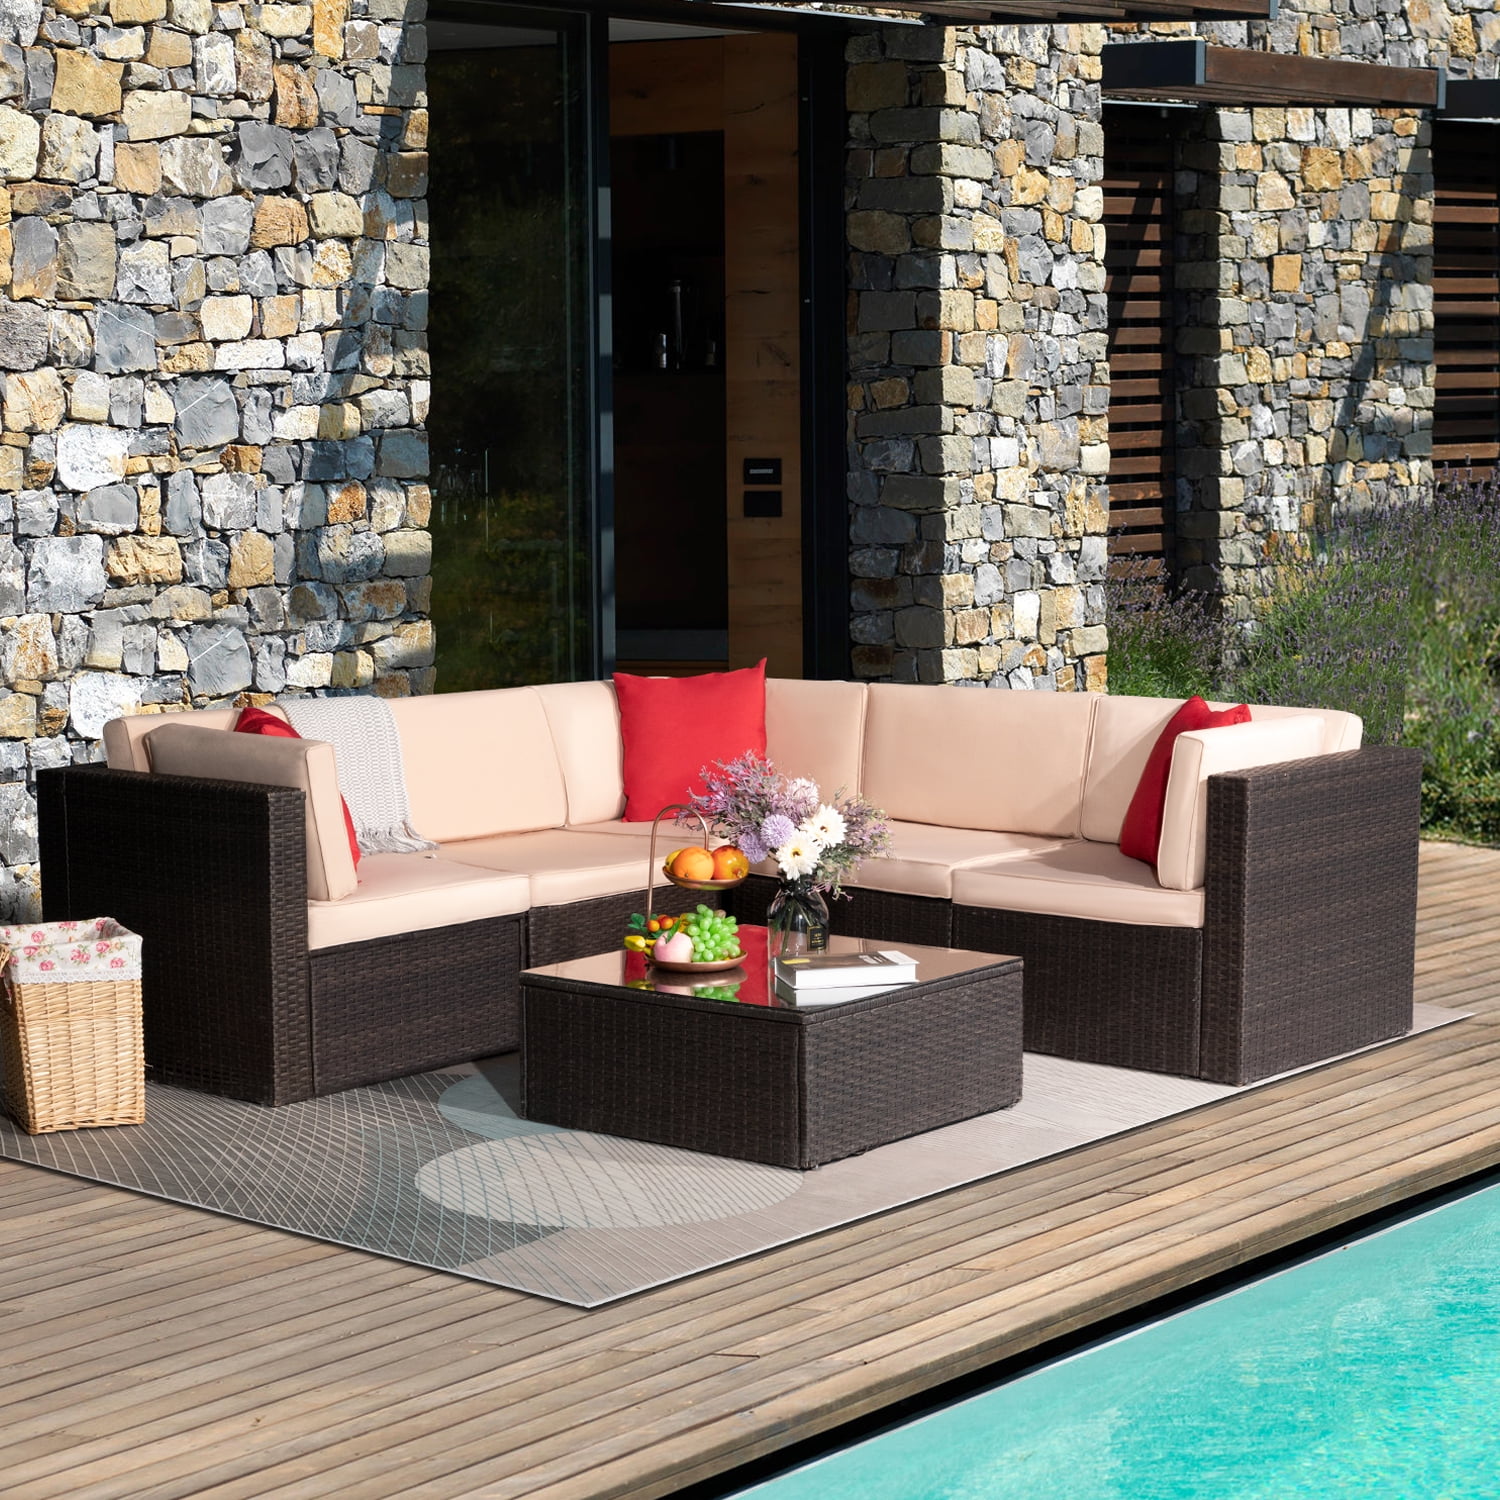 Orange EXCITED WORK Outdoor Sectional Couch Set-3 Piece Patio Rattan Wicker Furniture Set with Washable Cushions 